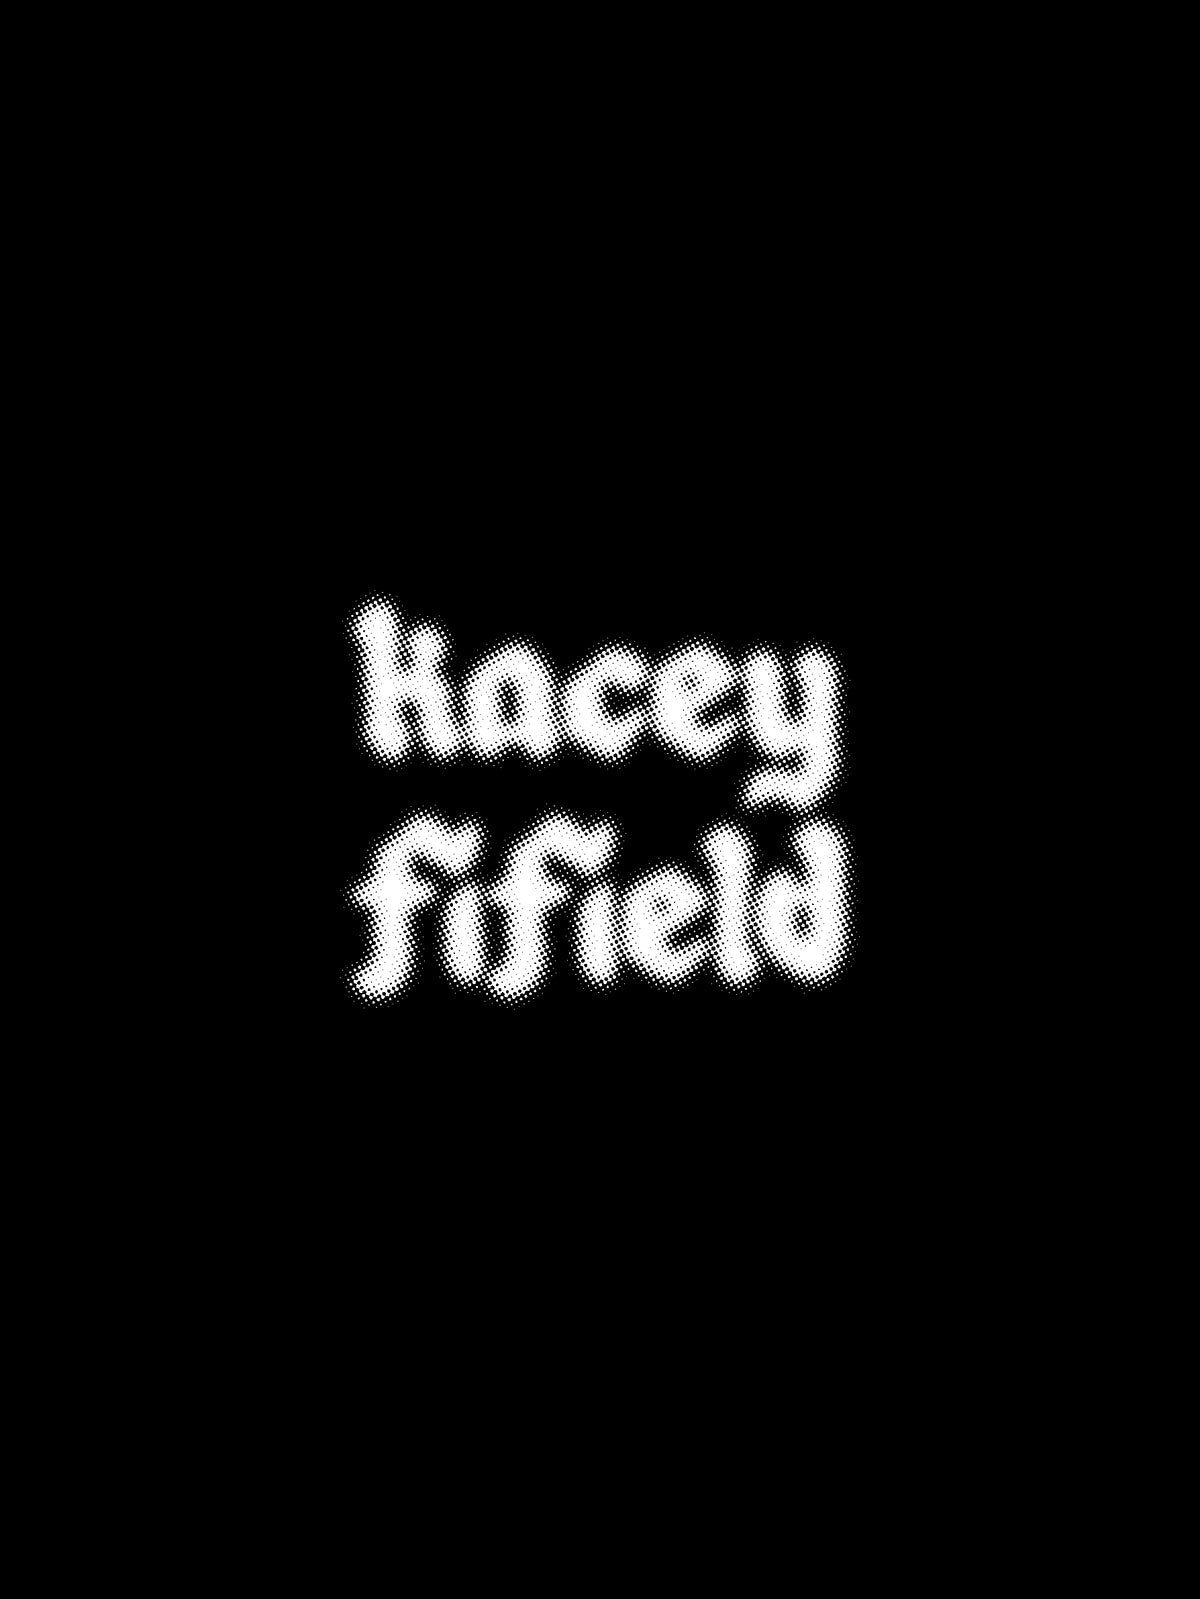 Nostalgia Haunts Me by Kacey Fifield